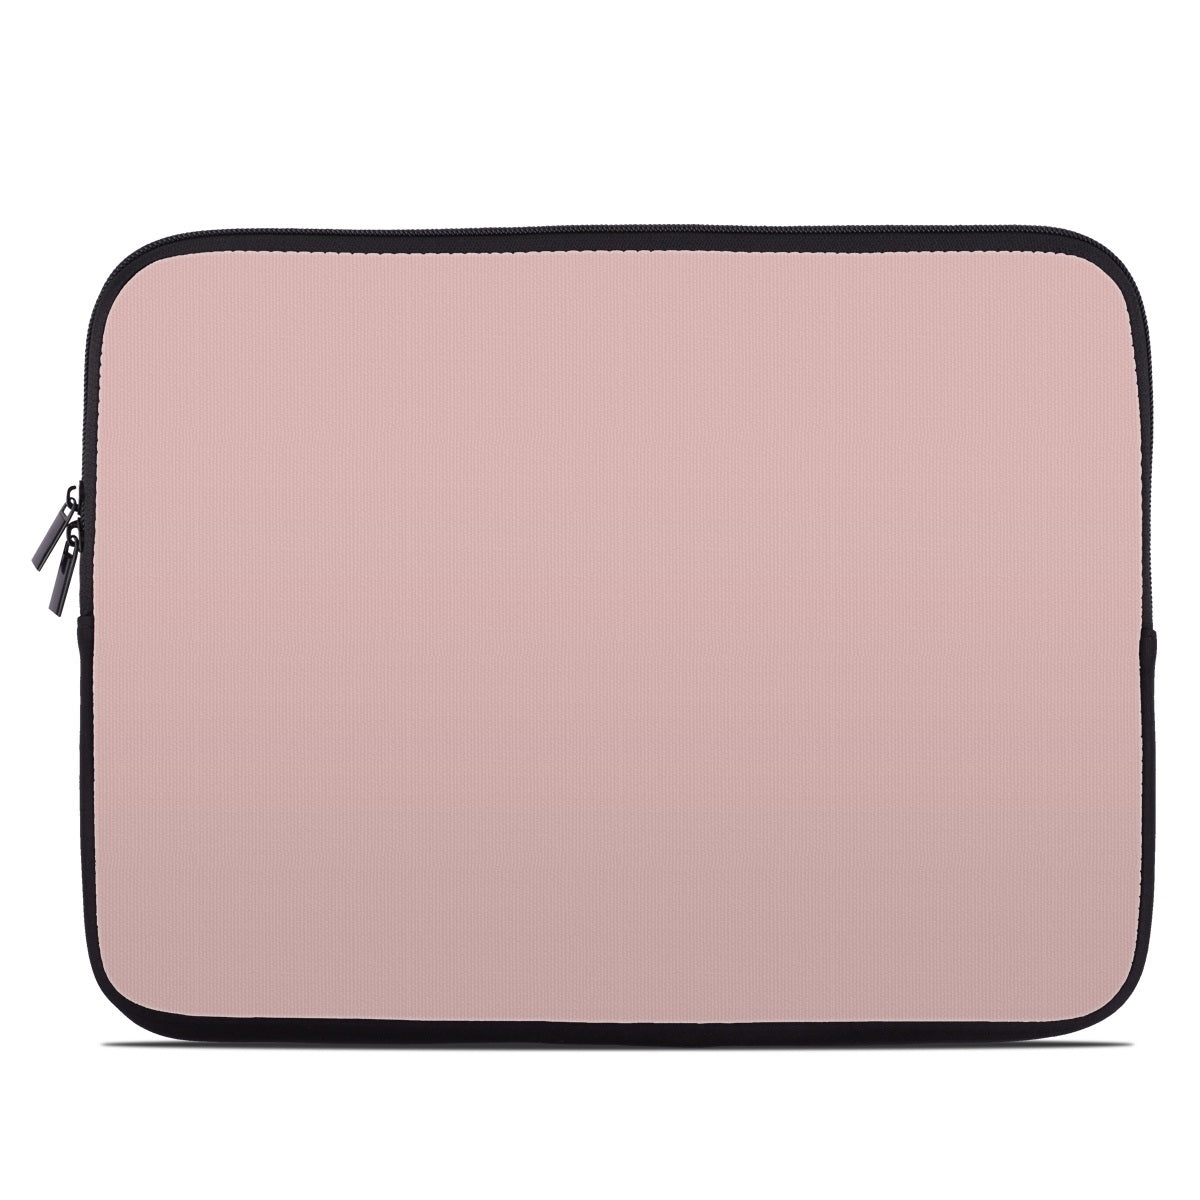 Solid State Faded Rose - Laptop Sleeve